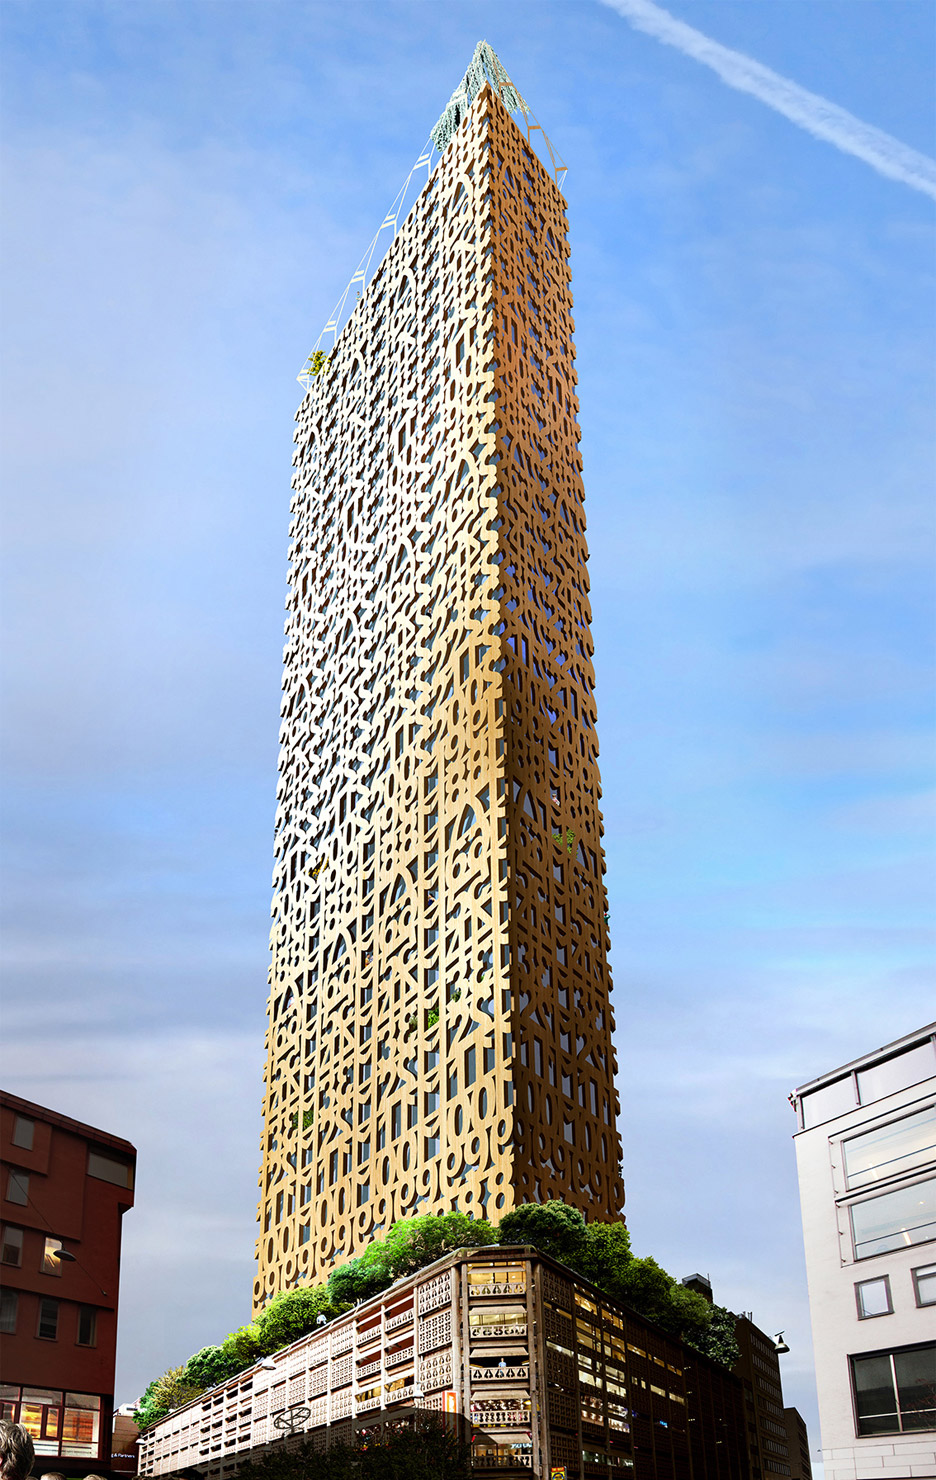   STOCKHOLM  /&nbsp;Trätoppen   Anders Berensson Architects has unveiled conceptual plans for Stockholm’s tallest building: a 436-foot (133 m) wooden skyscraper covered in numbers, which would be erected on top of a 1960s car park in the city center.